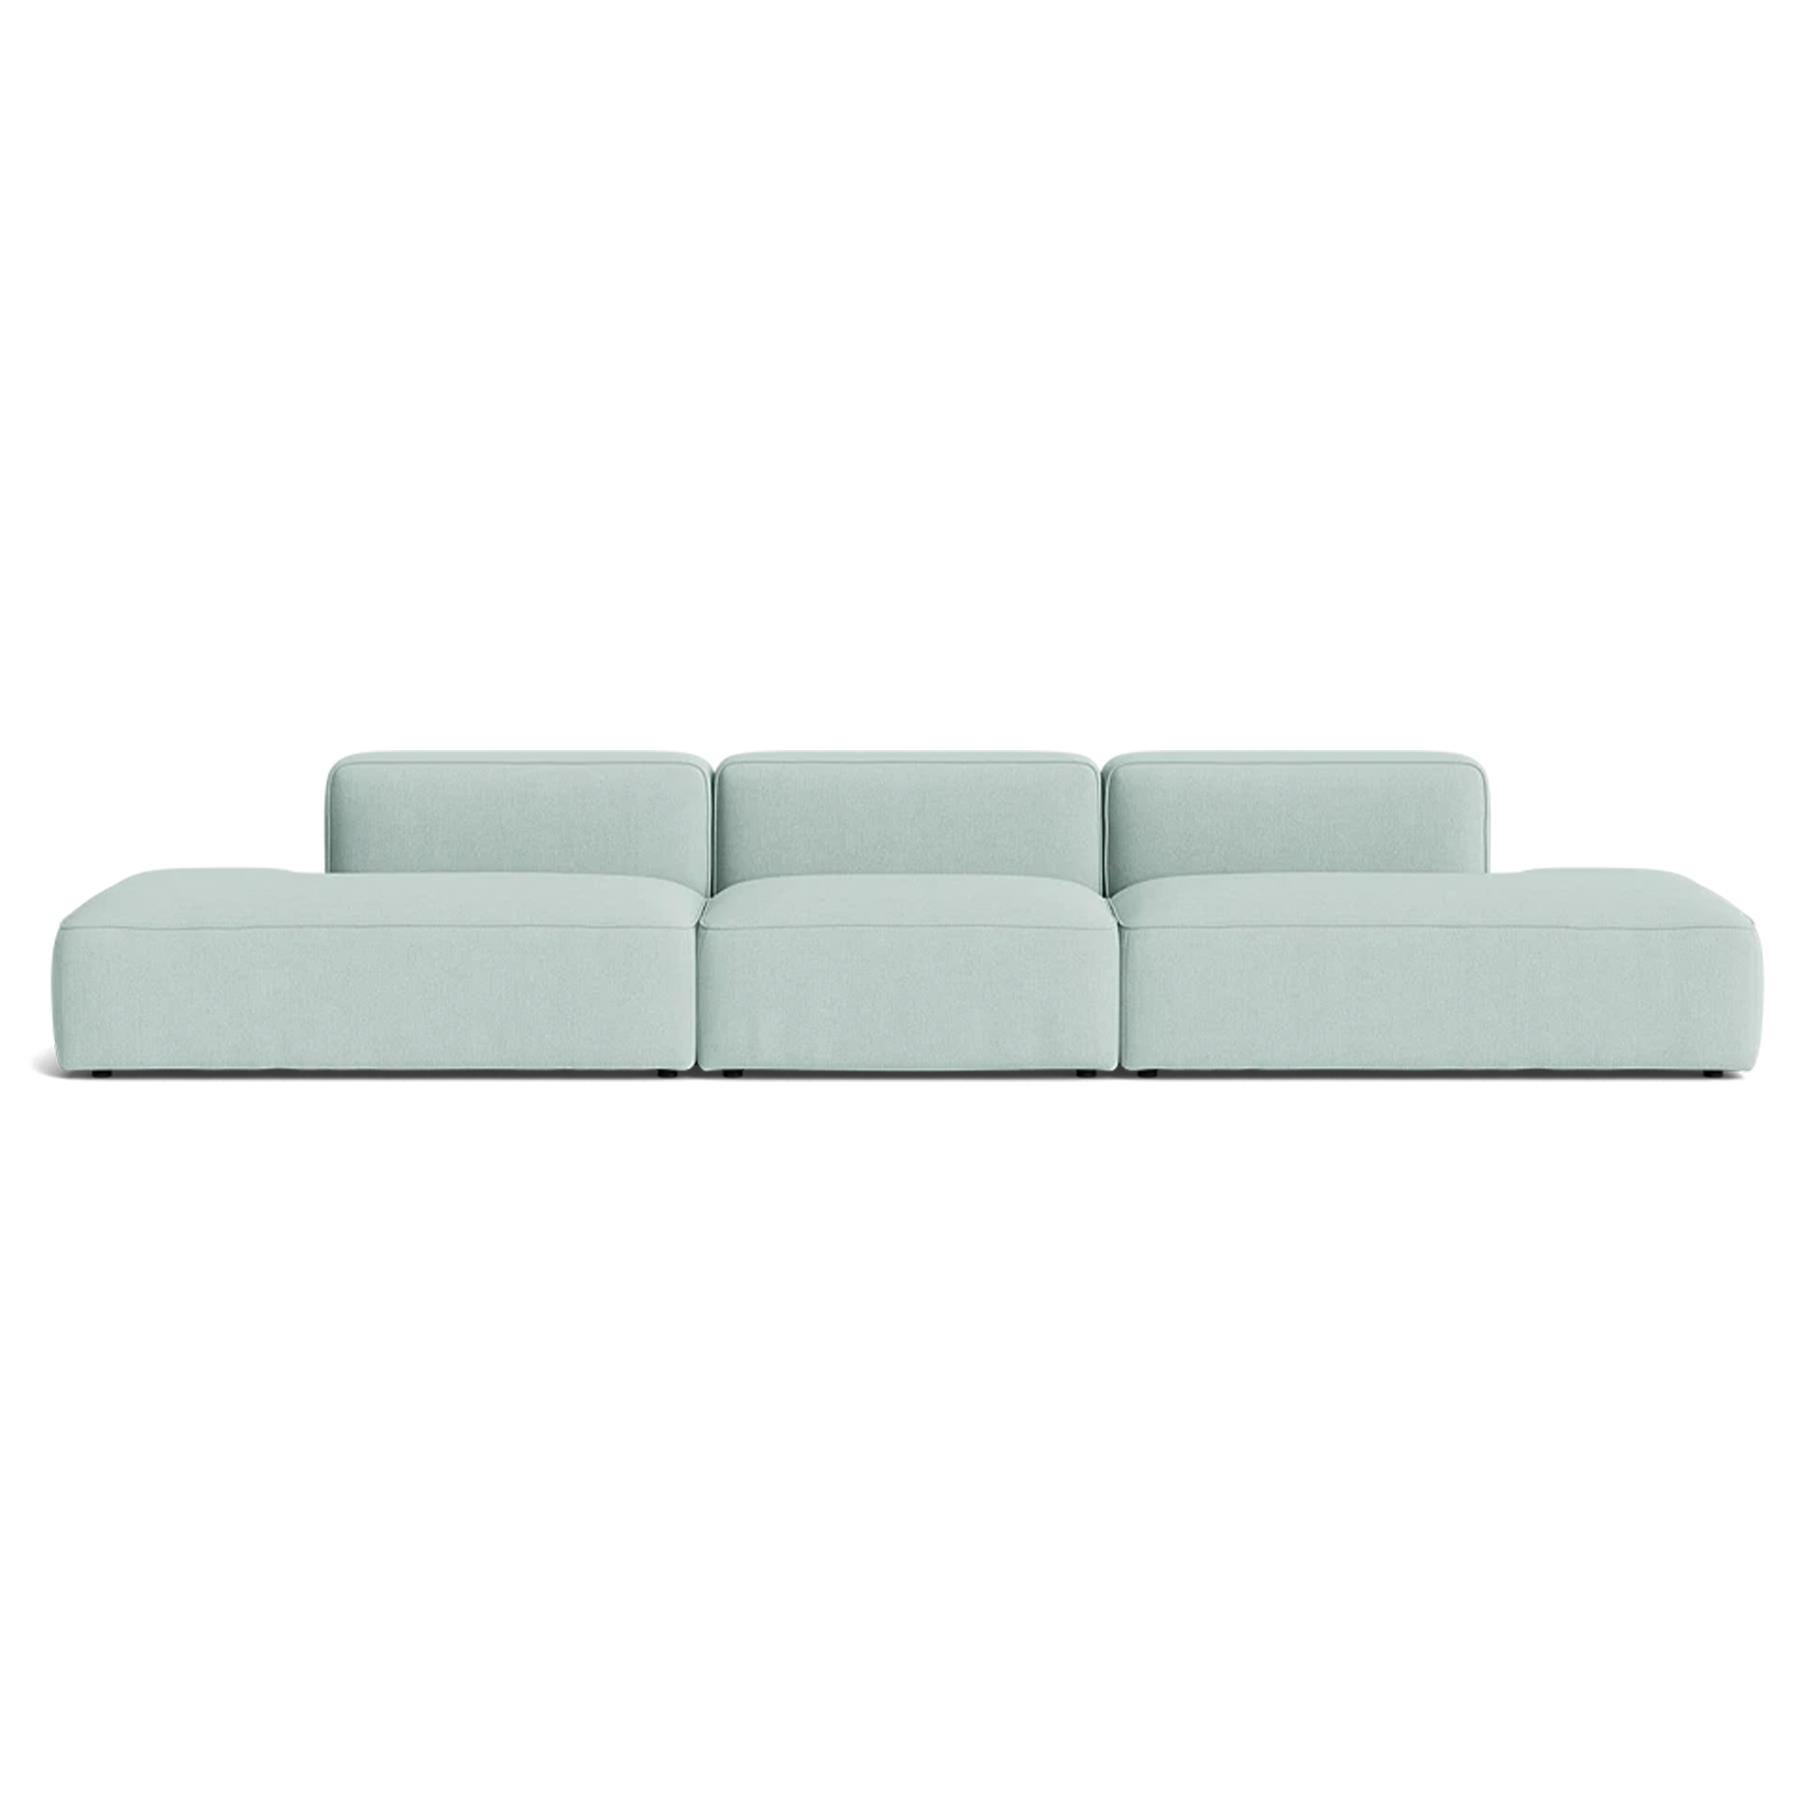 Make Nordic Basecamp Xl Midt Open Sofa Fiord 721 Blue Designer Furniture From Holloways Of Ludlow